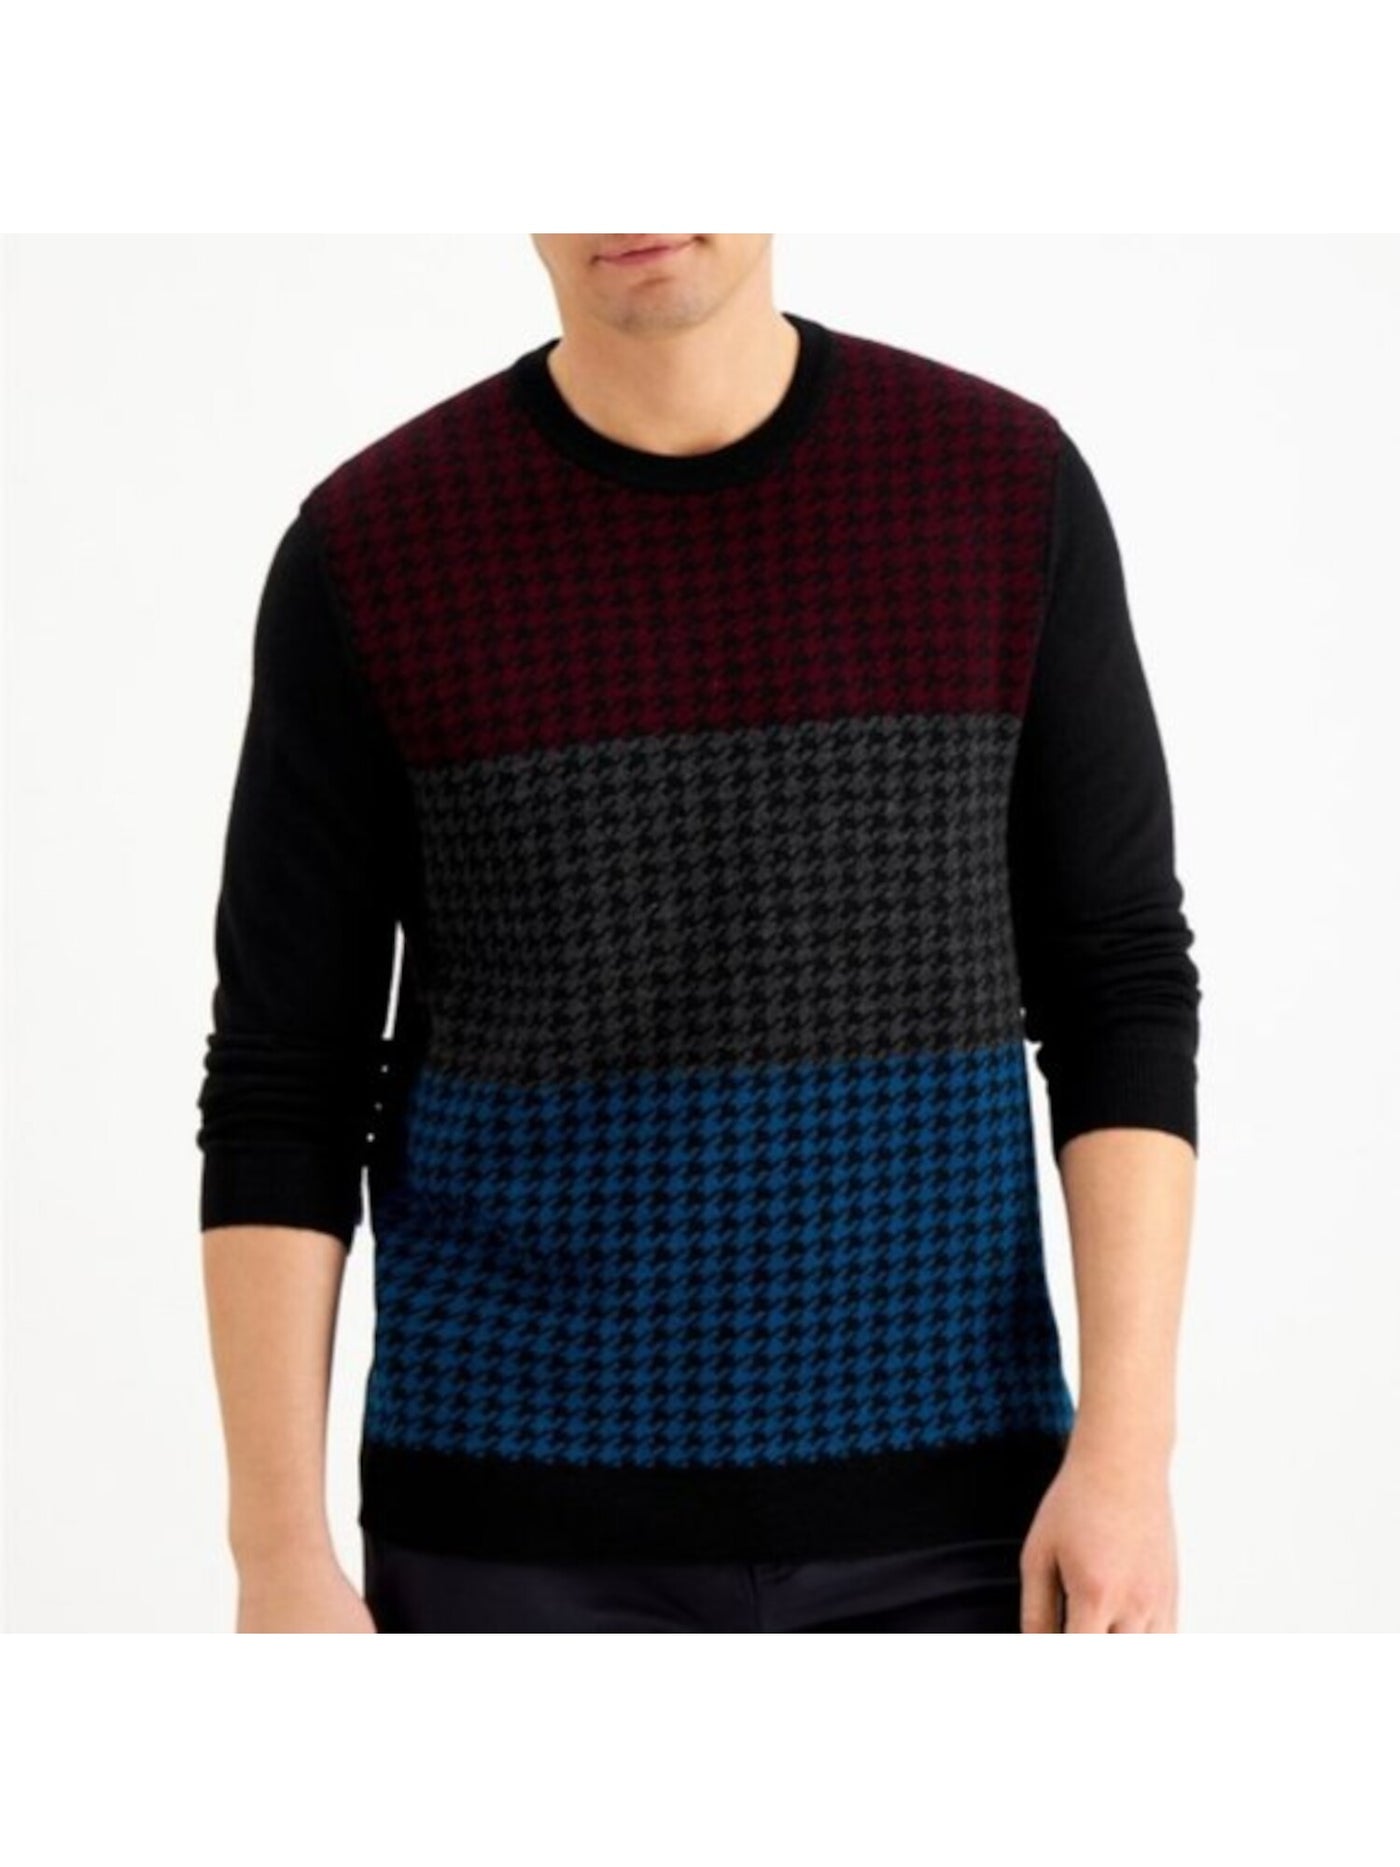 CLUBROOM Mens Black Houndstooth Crew Neck Pullover Sweater S